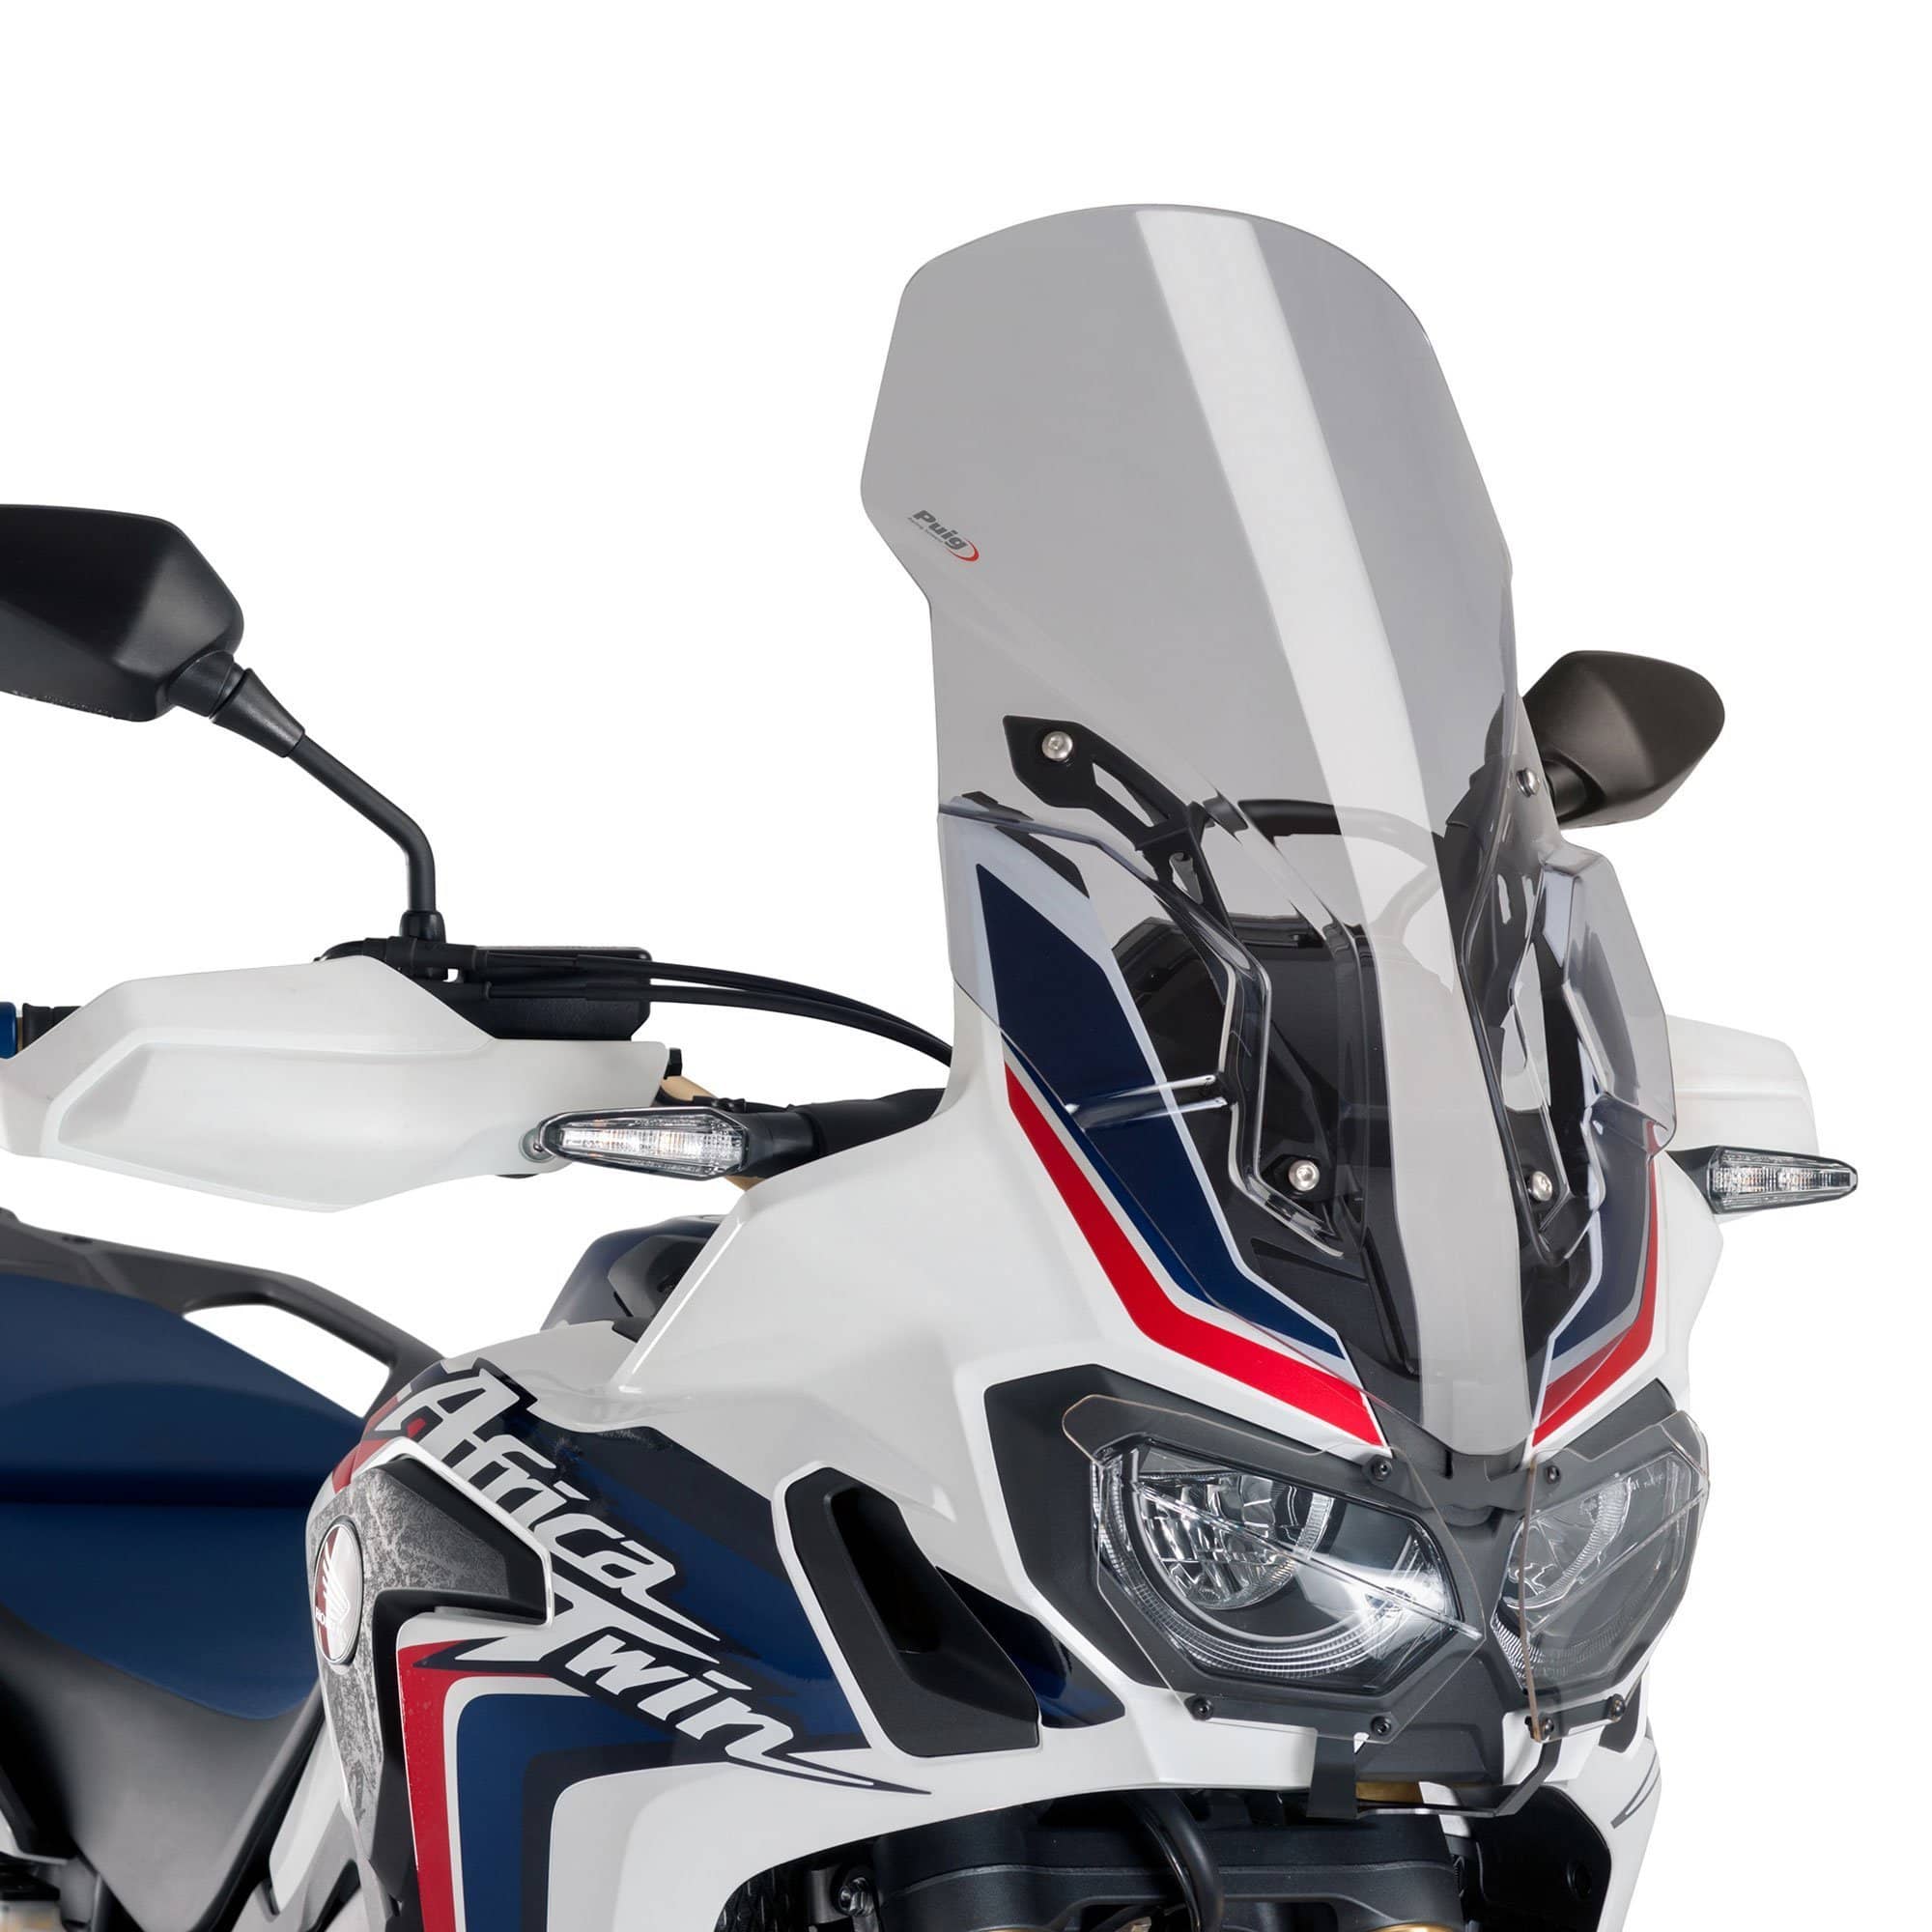 Puig Headlight Guard | Clear | Honda CRF 1000 L Africa Twin Adventure Sports 2018>2019-M8714W-Headlight Protection-Pyramid Motorcycle Accessories